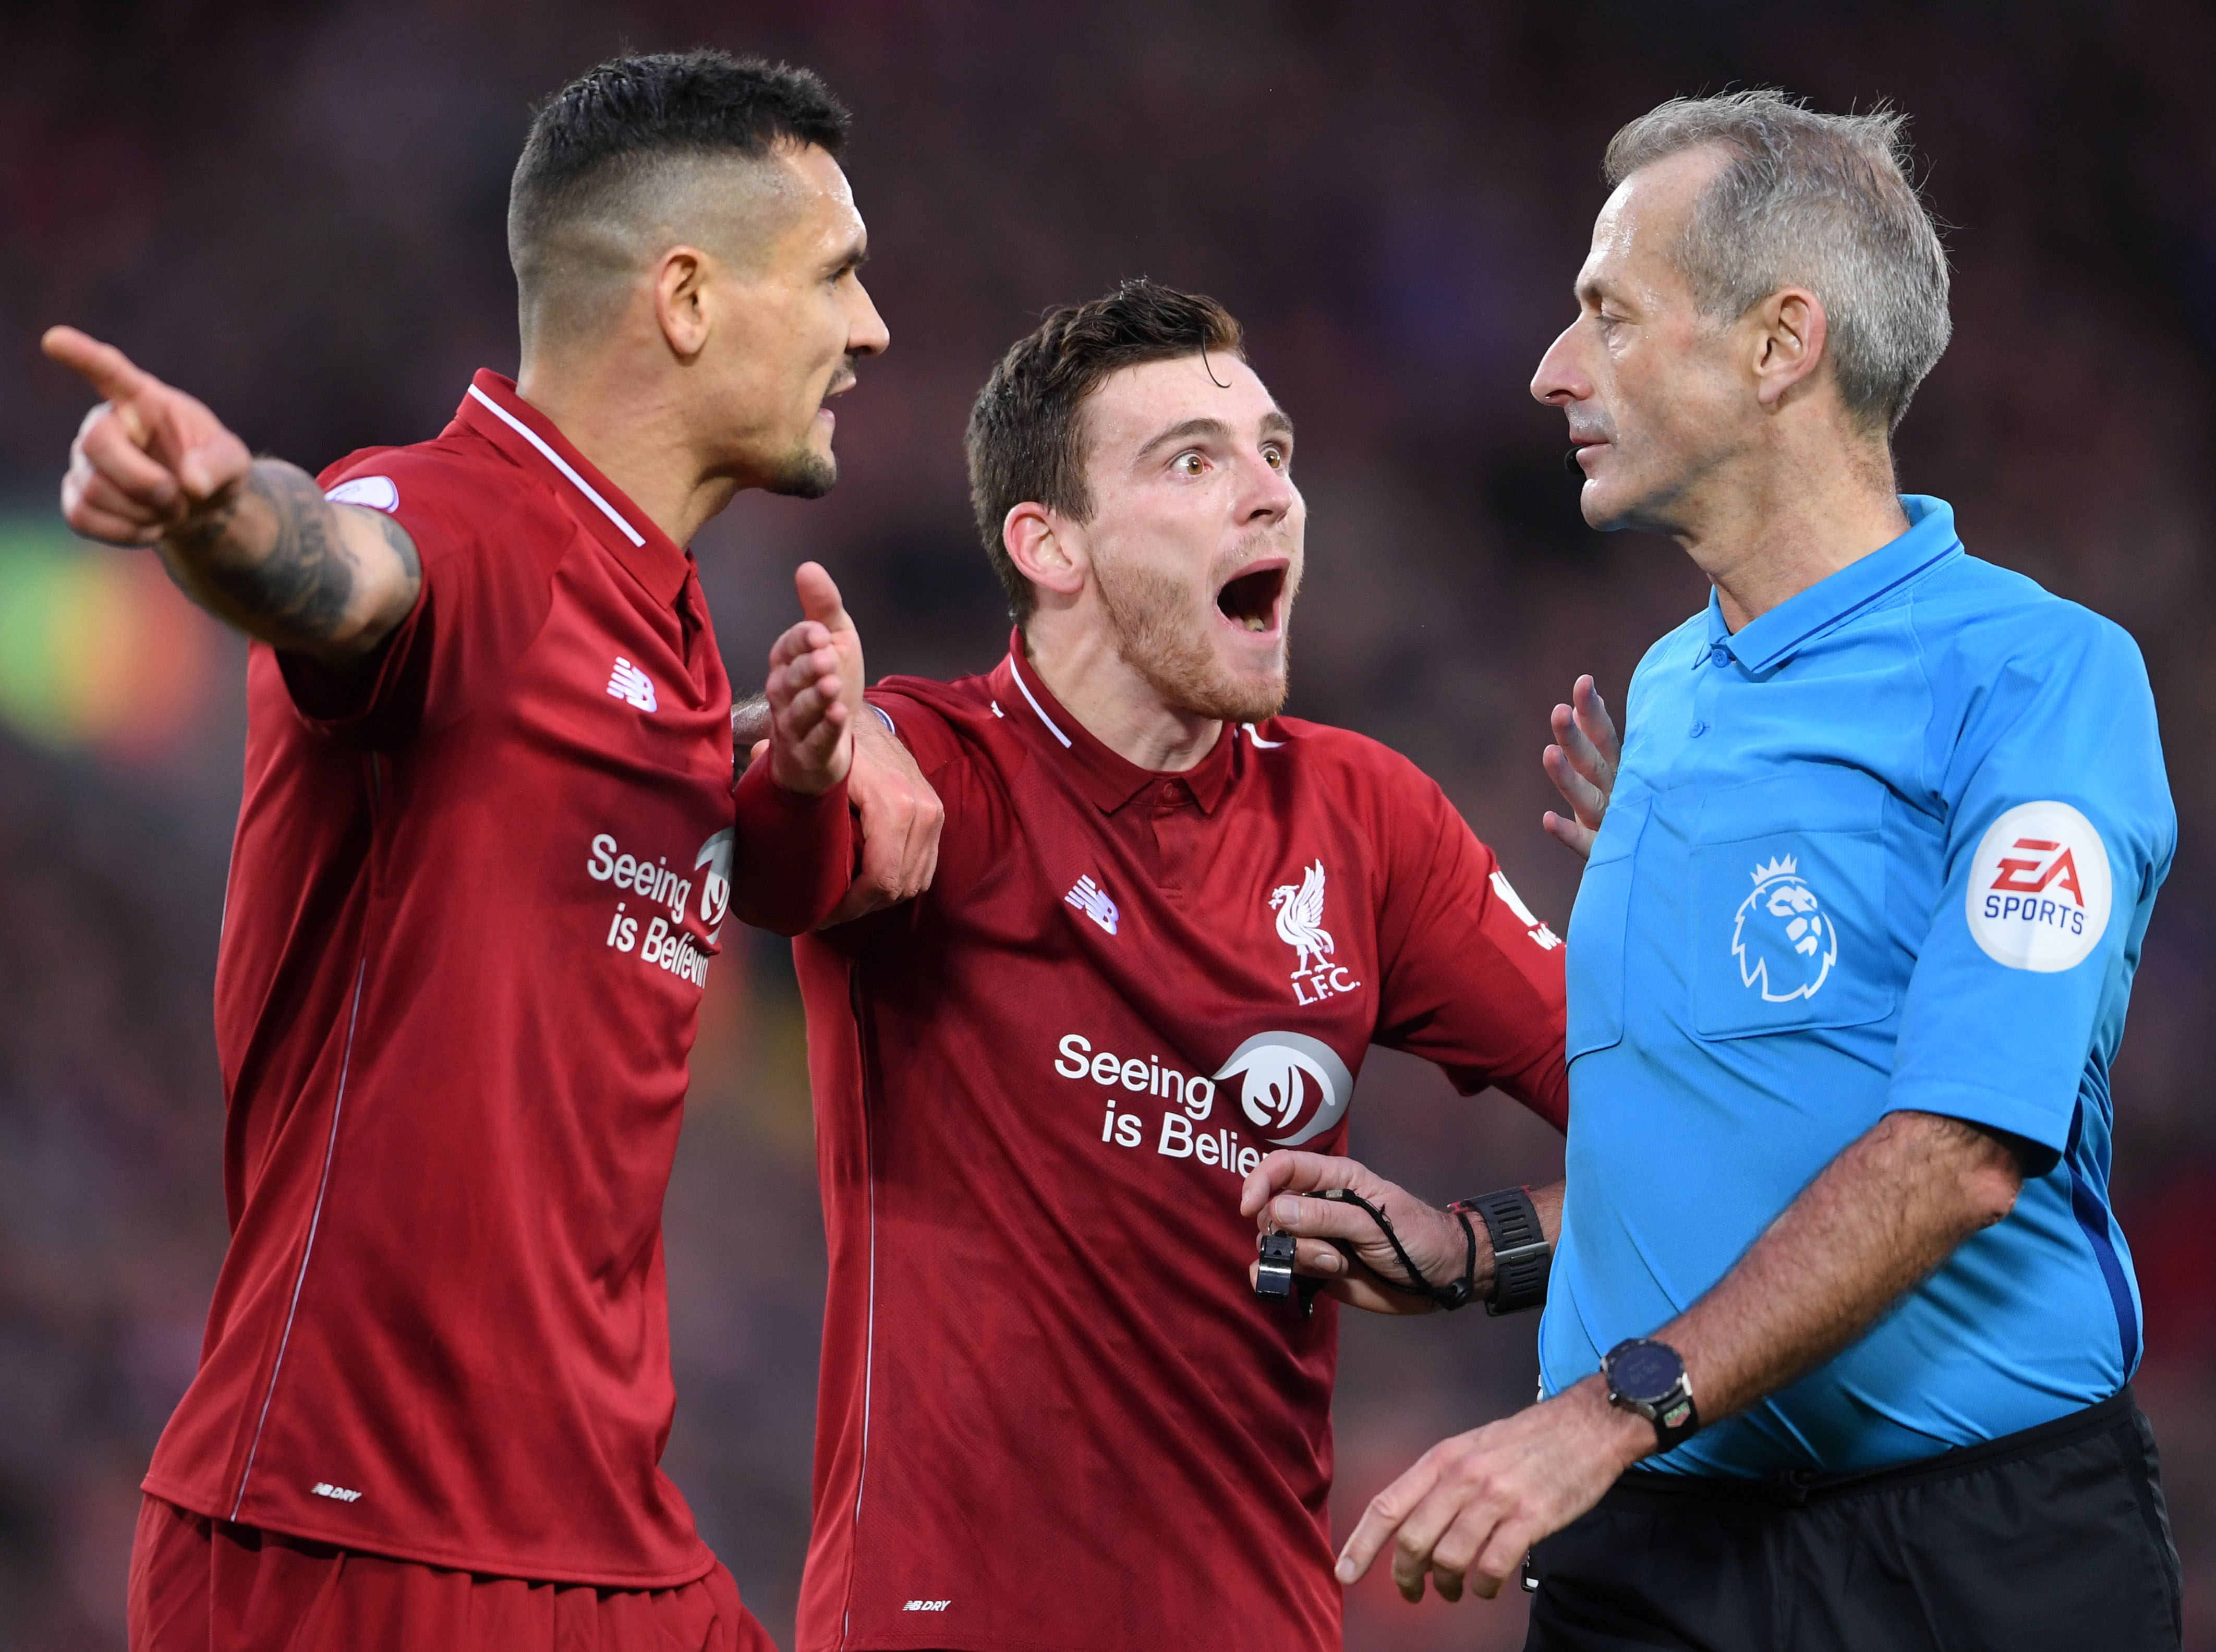 LIVERPOOL, ENGLAND - OCTOBER 07: Dejan Lovren and Andrew Roberton of Liverpool argue with Referee, Martin Atkinson during the Premier League match between Liverpool FC and Manchester City at Anfield on October 07, 2018 in Liverpool, United Kingdom. (Photo by Laurence Griffiths/Getty Images)